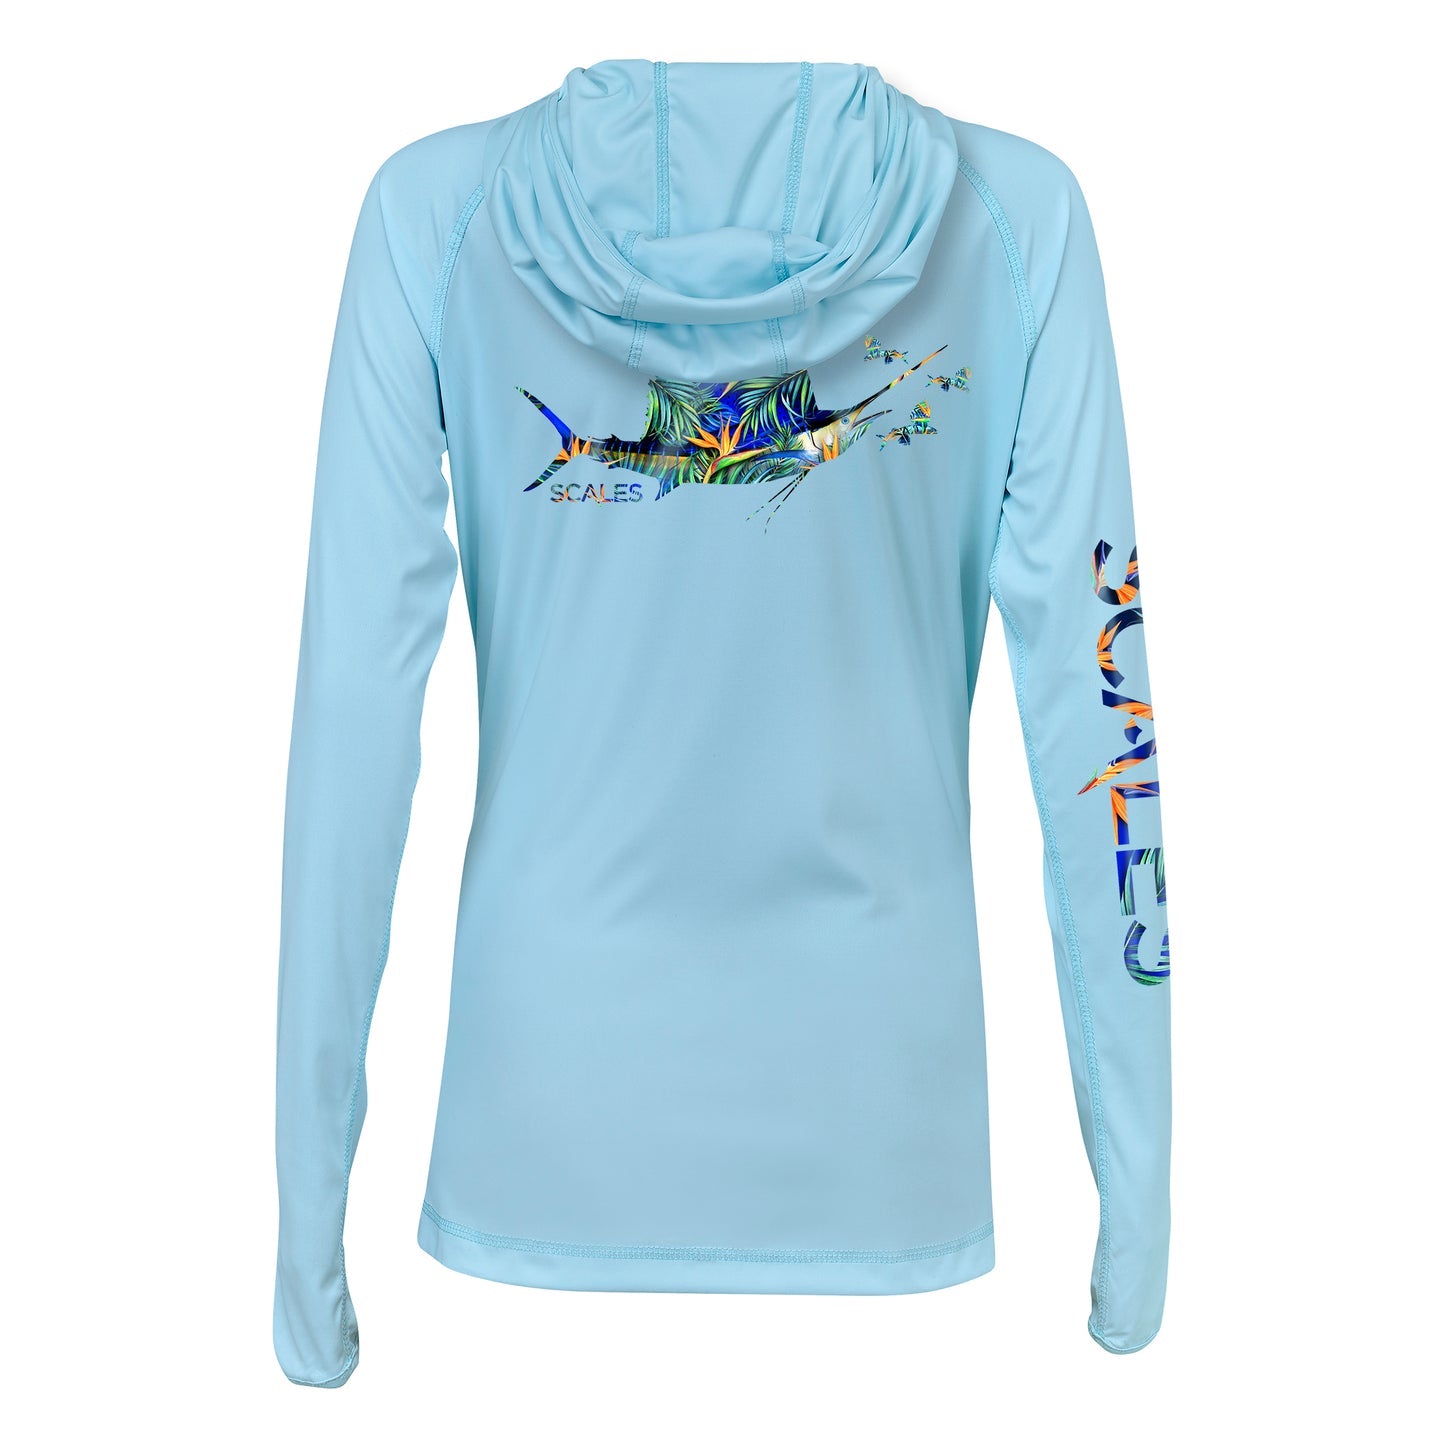 SCALES Fly Sail Pro Performance Womens Hoodie